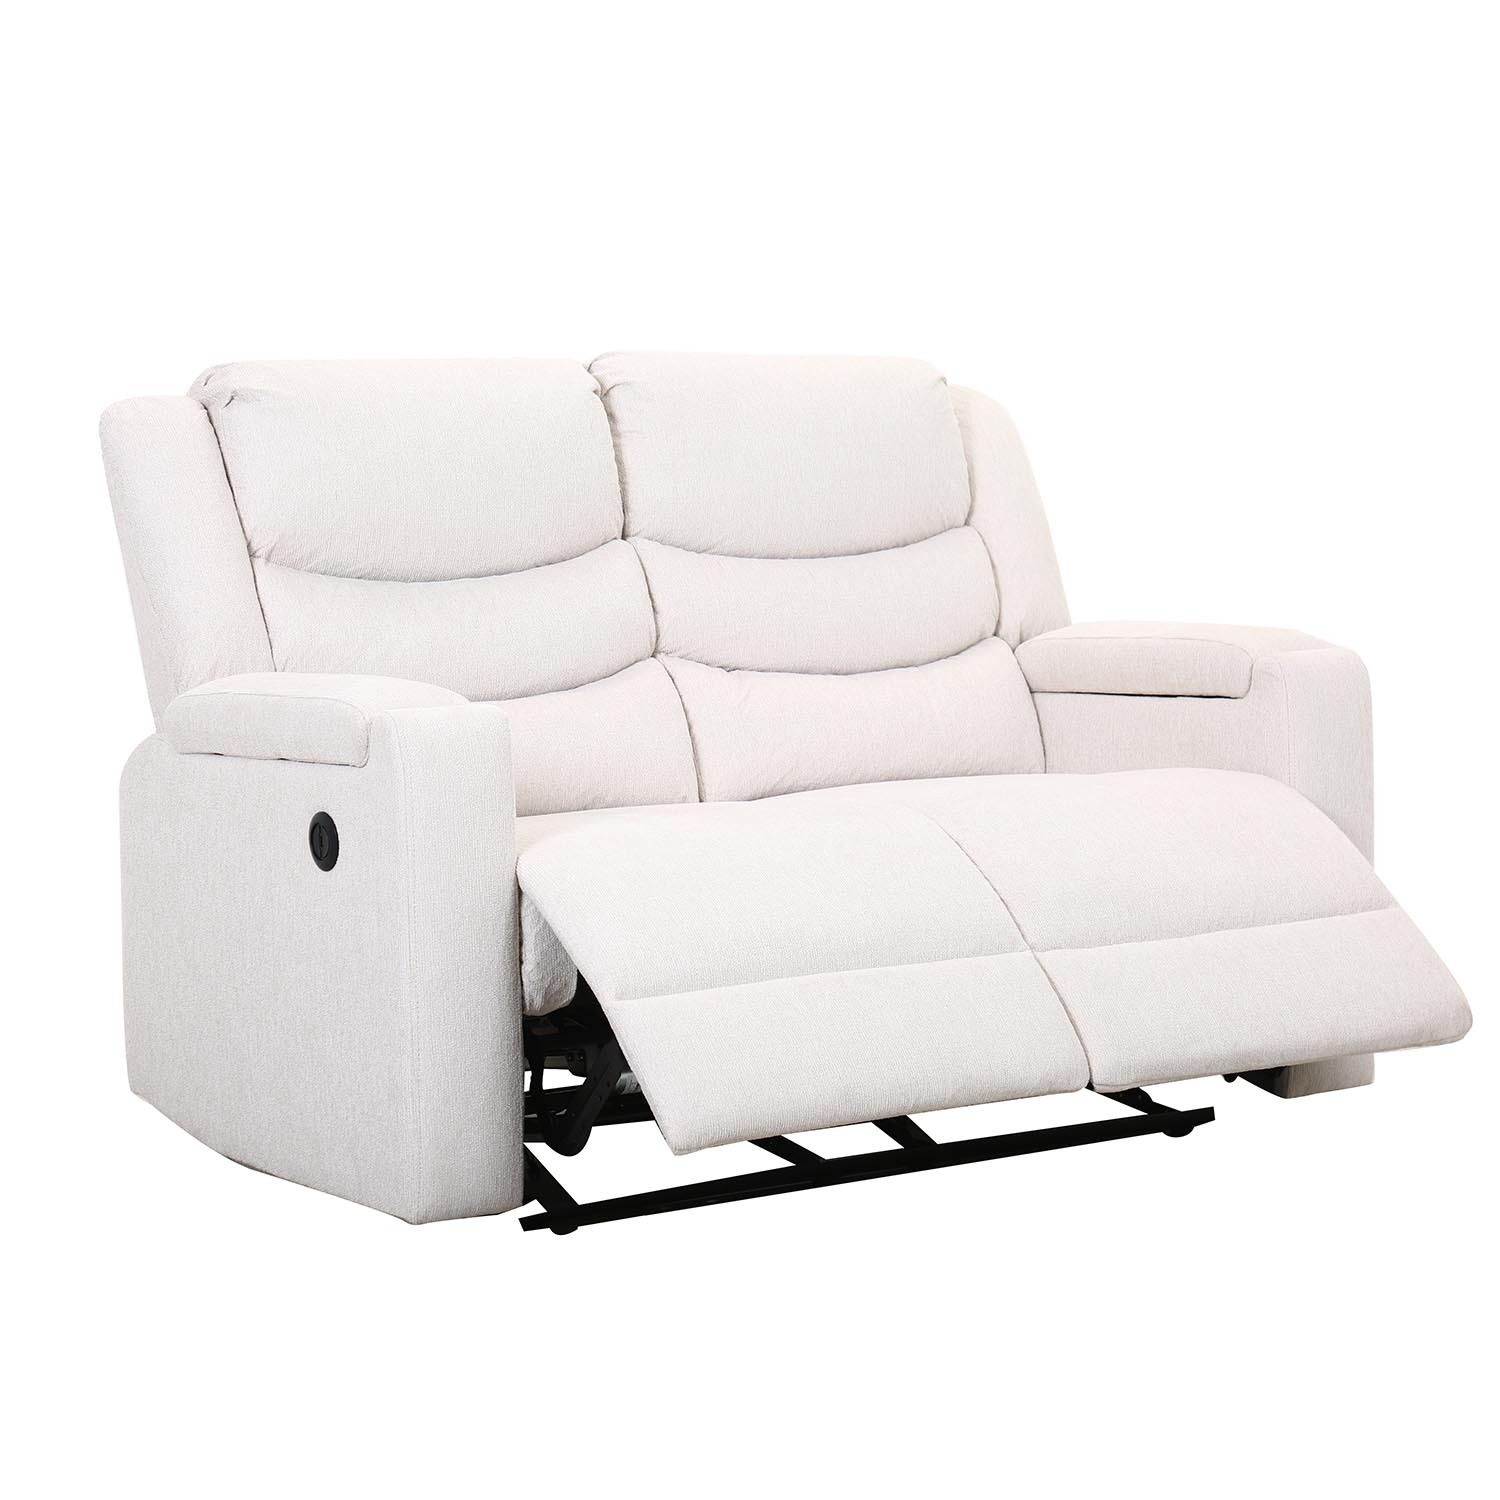 Heritage 2 Seater Ivory Recliner Sofa Image 4